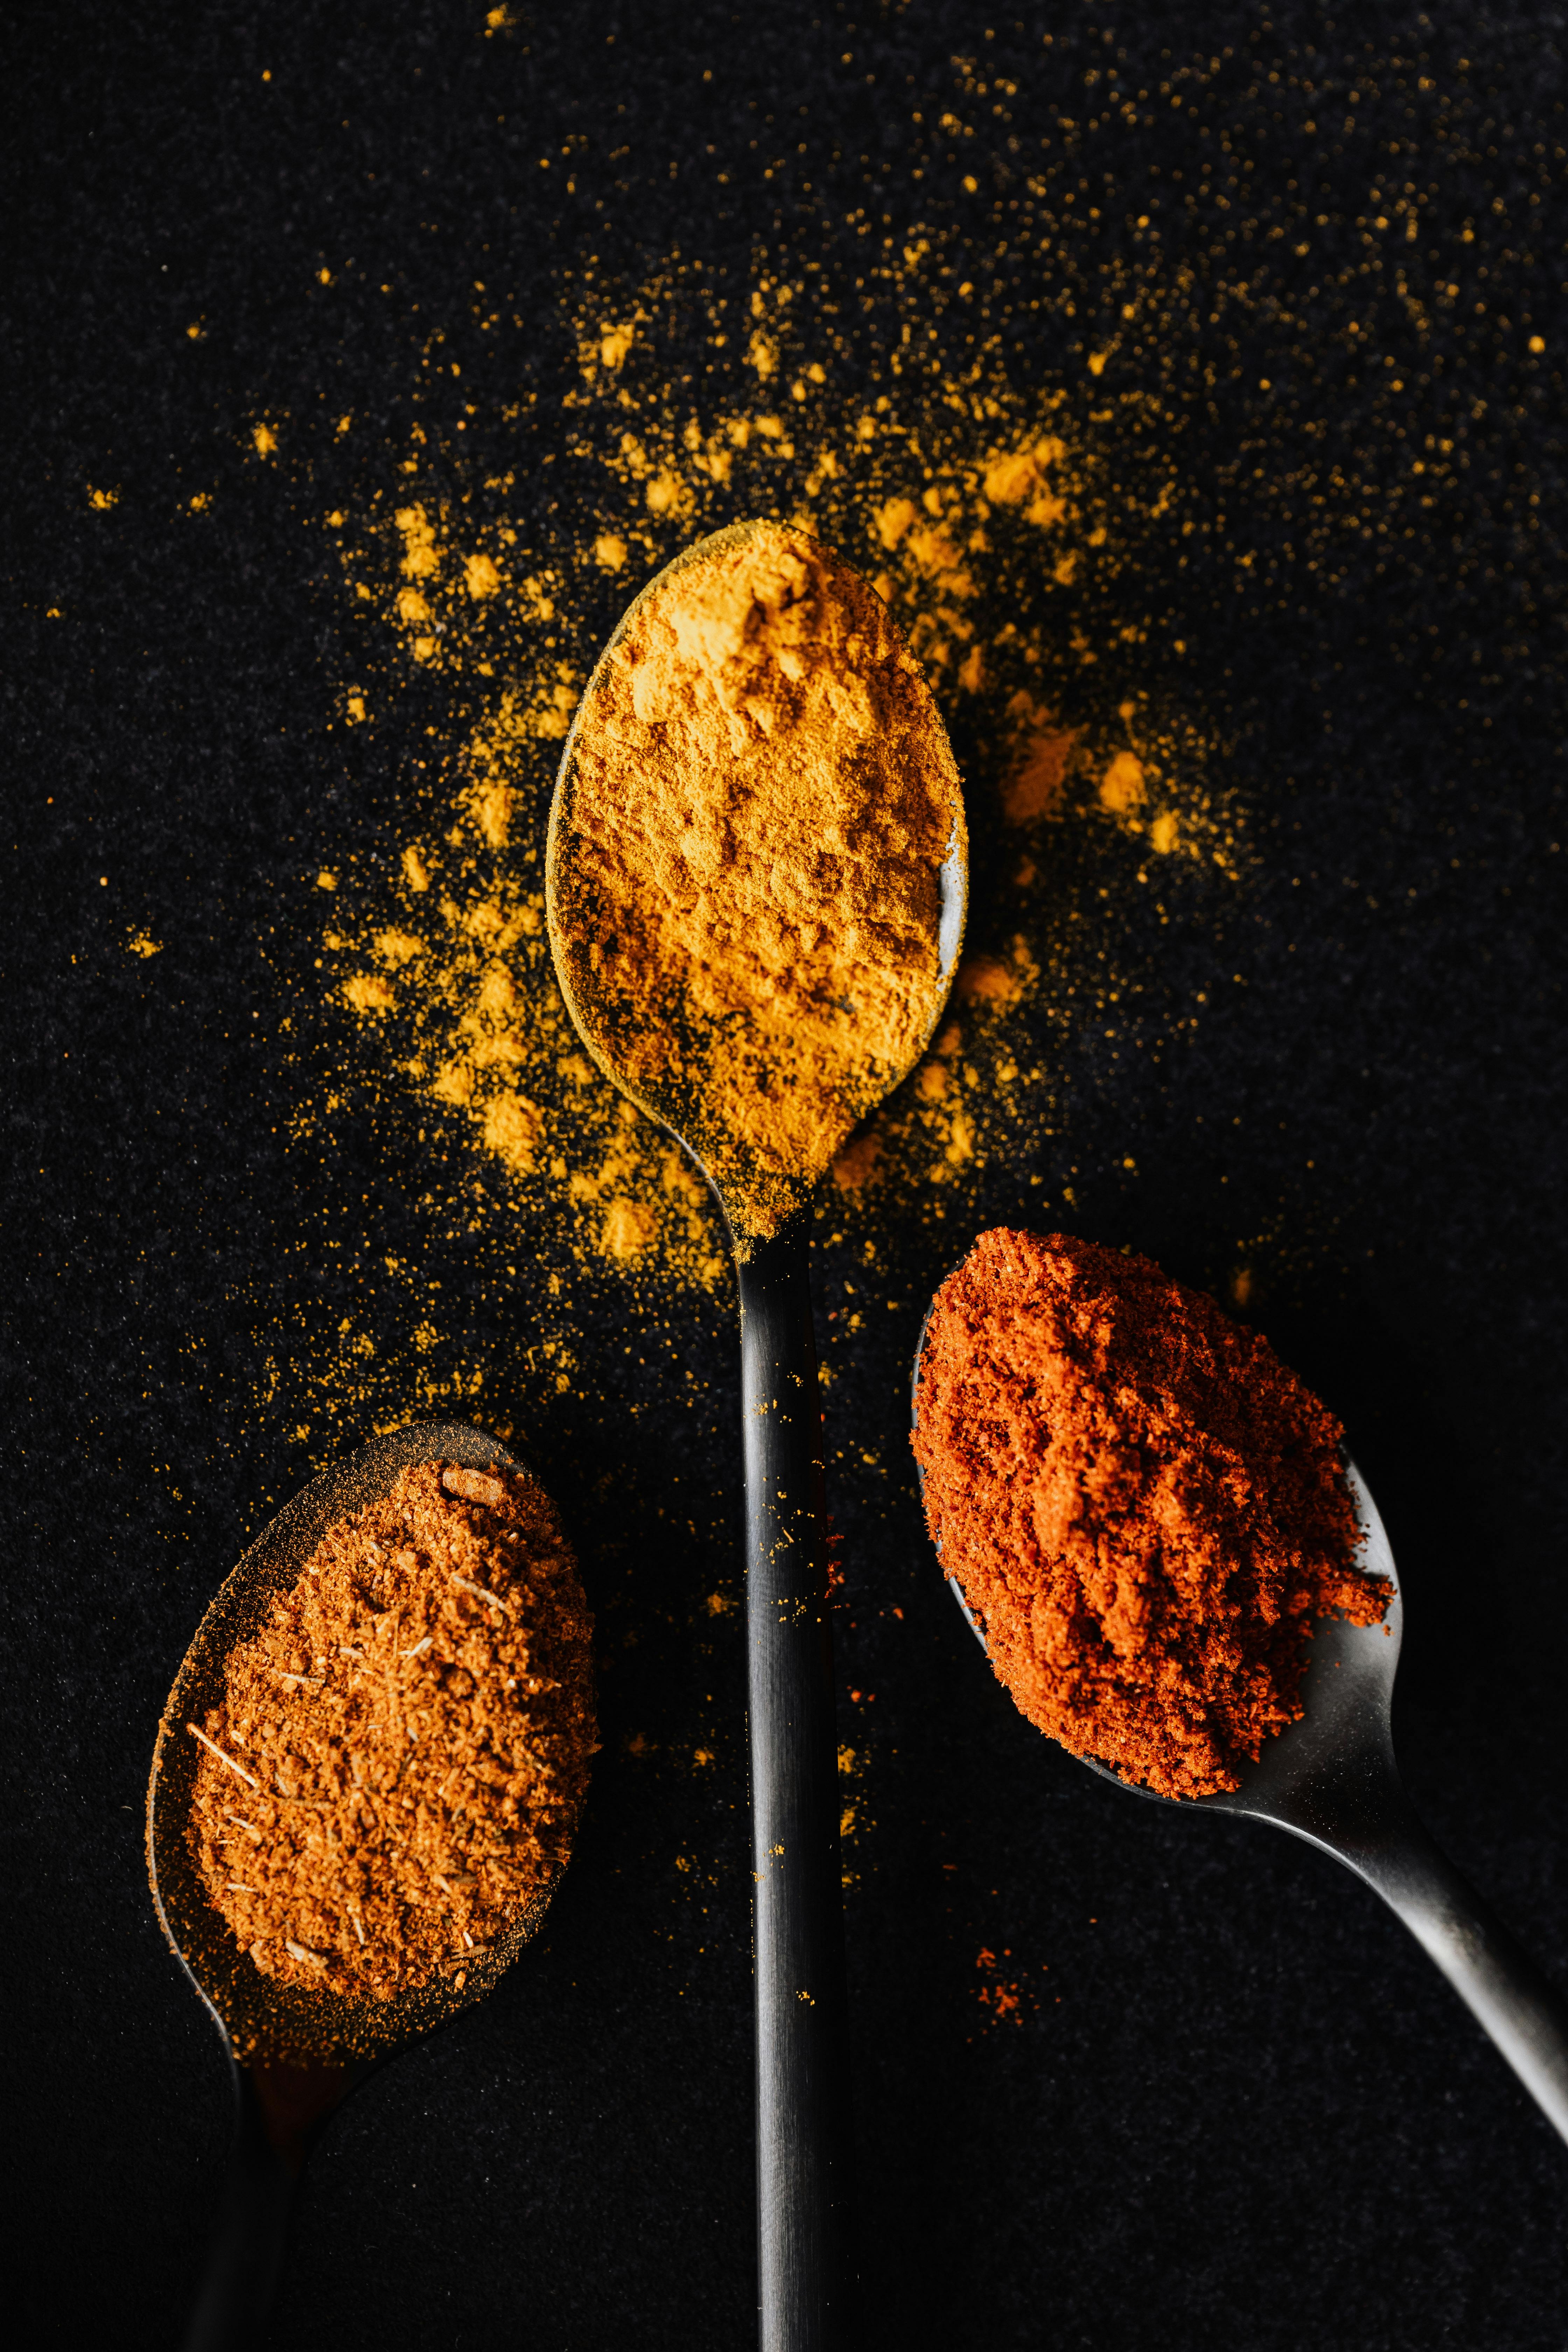 Spices Background Images  Free Download on Freepik